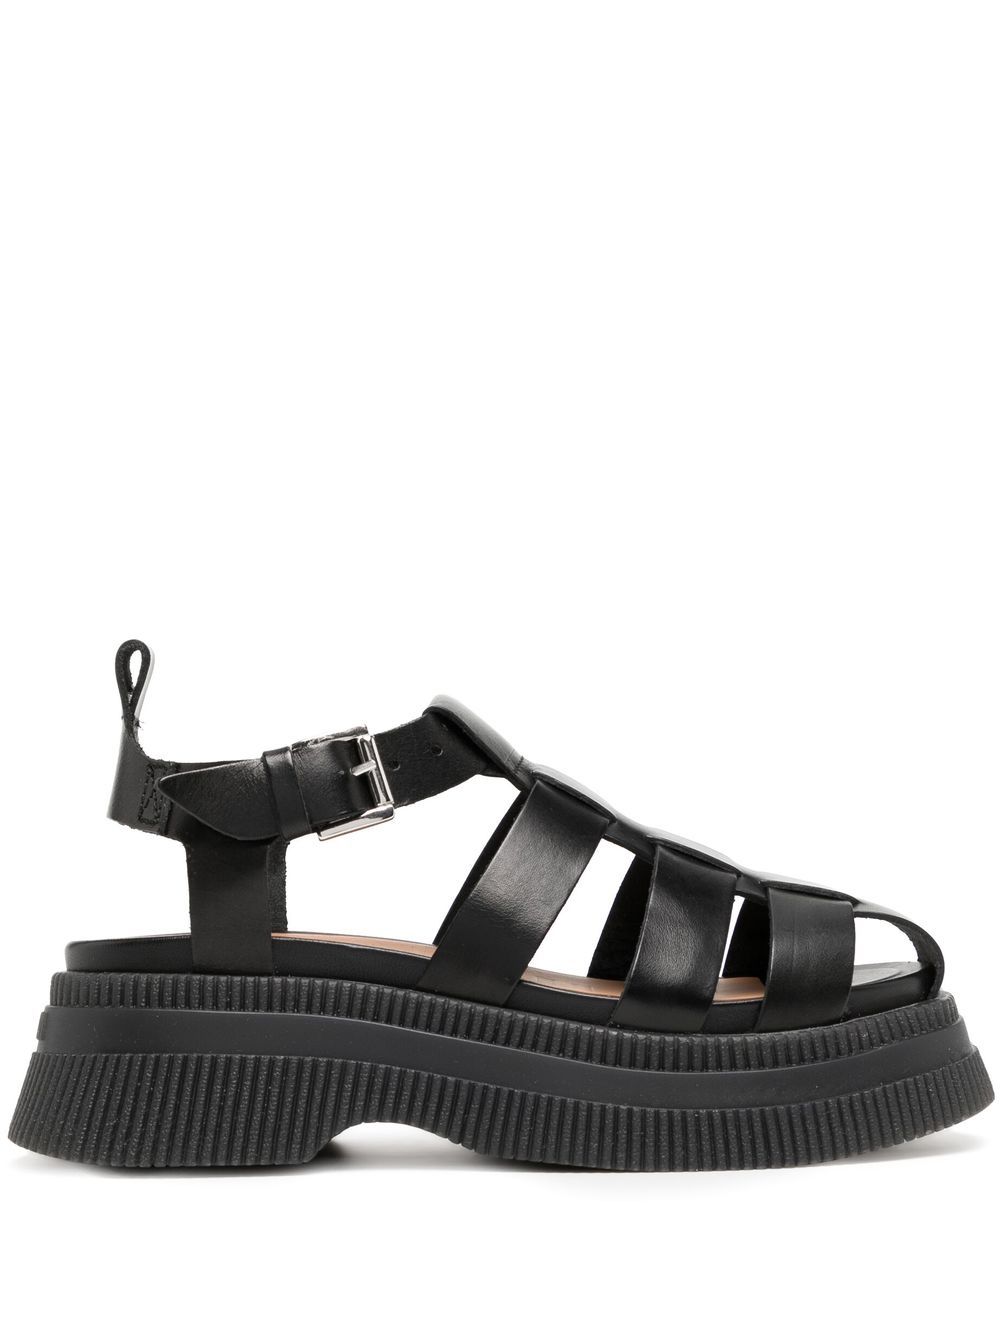 GANNI CREEPERS CAGED SANDALS